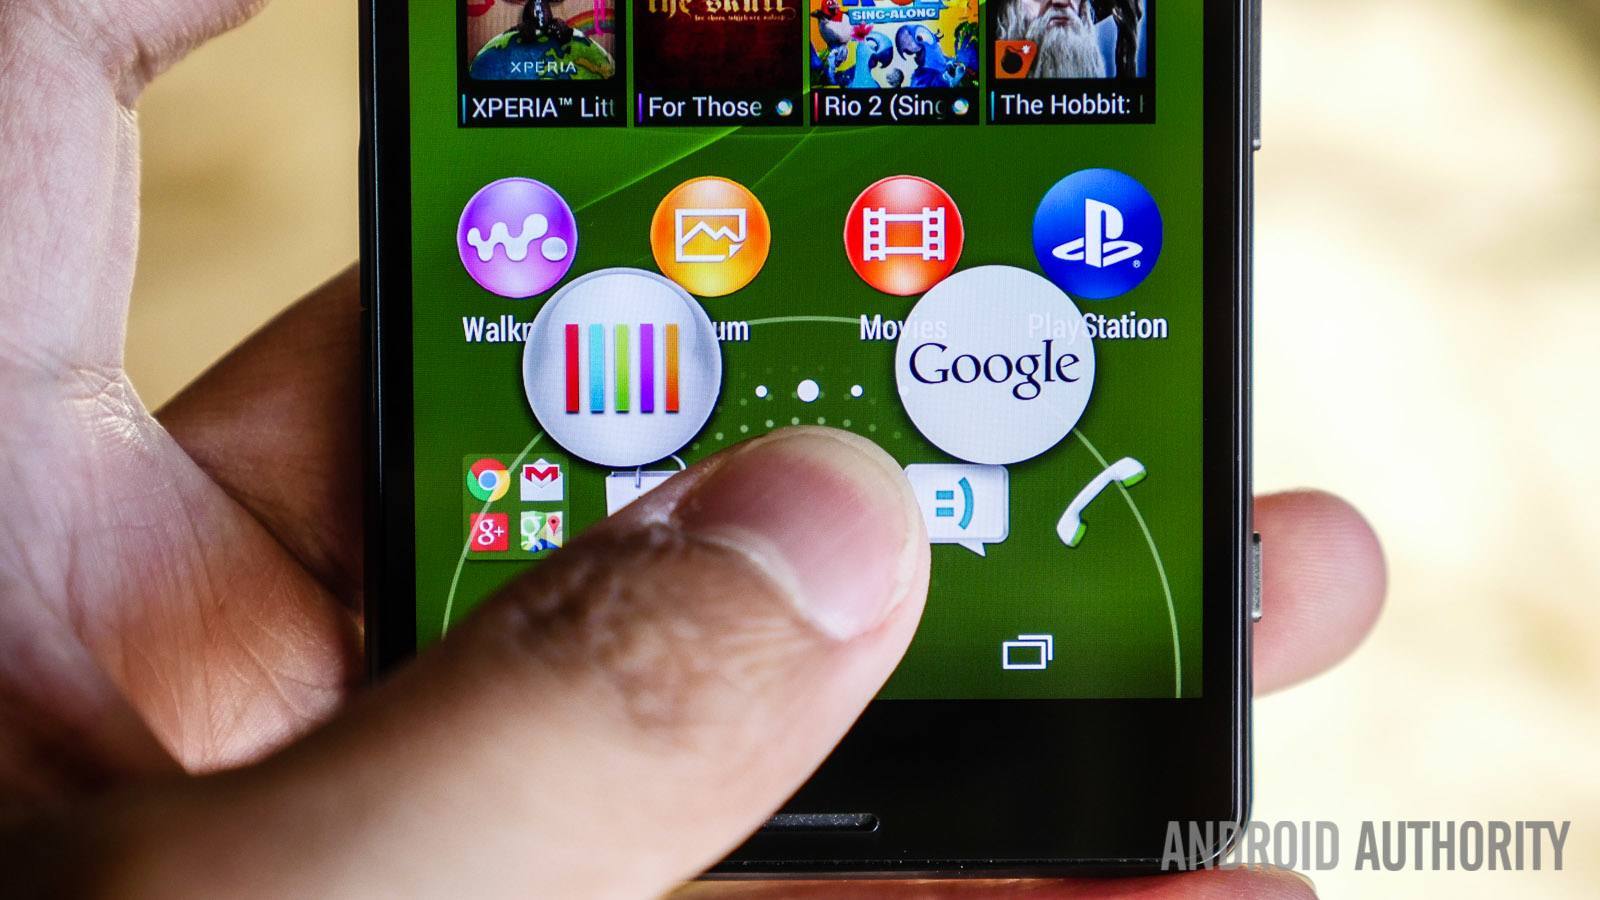 sony xperia z3 compact review aa (21 of 21)